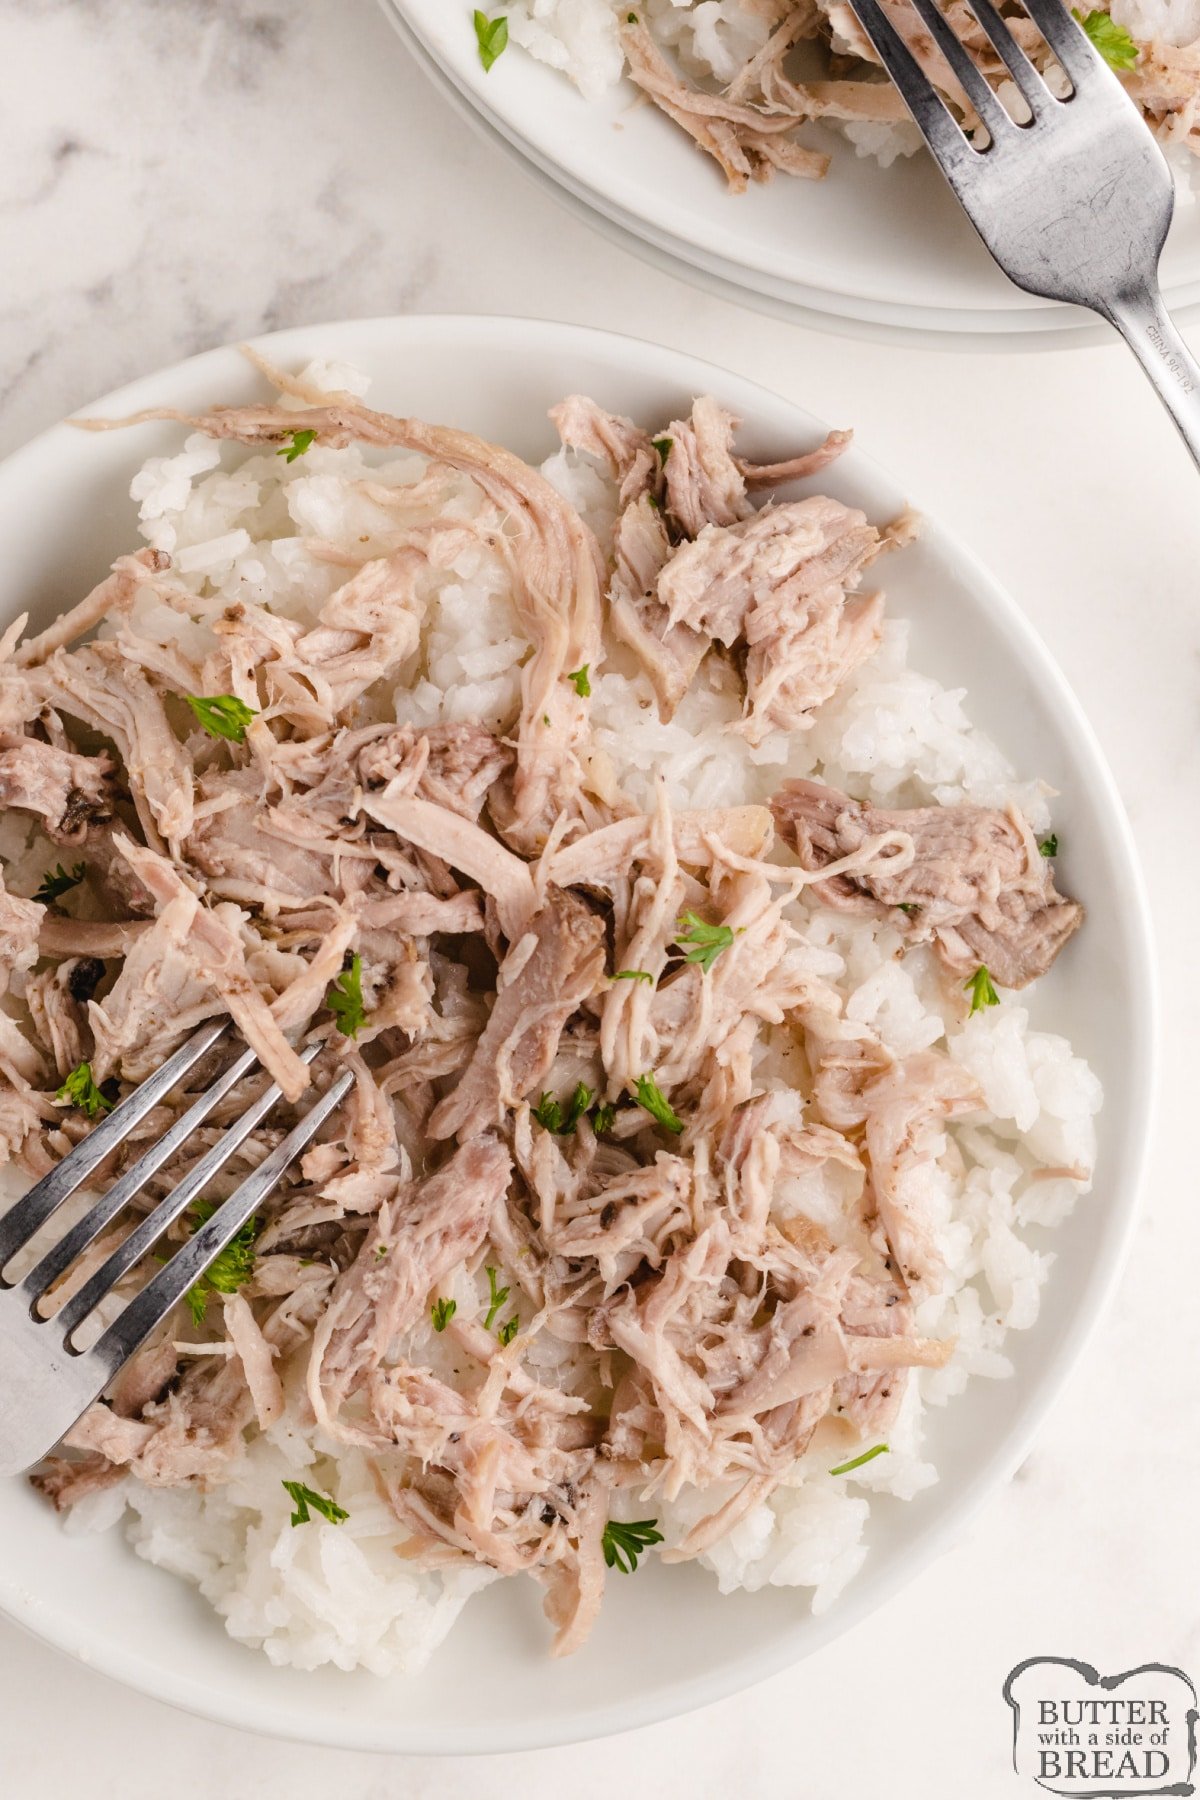 Crockpot Hawaiian Kalua Pork is tender, juicy, full of flavor and made with only 3 ingredients. Just a few minutes of prep time to make this delicious pork recipe in the slow cooker! 